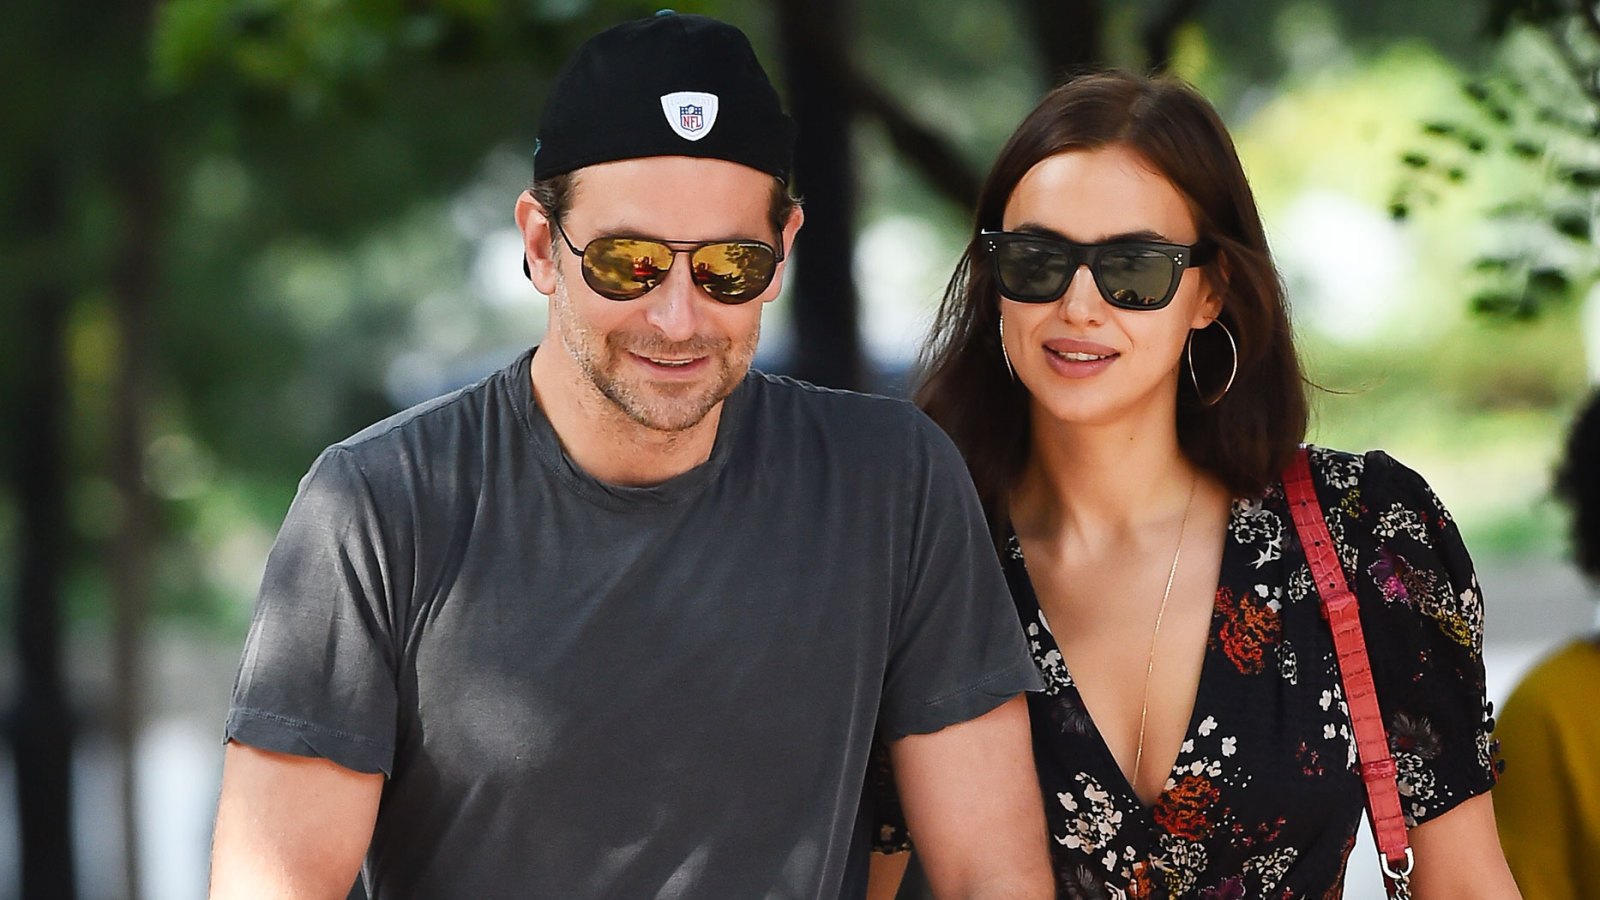 Bradley Cooper and Irina Shayk 'Were All Smiles' at Disneyland With Daughter Lea: 'They Were Having Such a Fun Time'